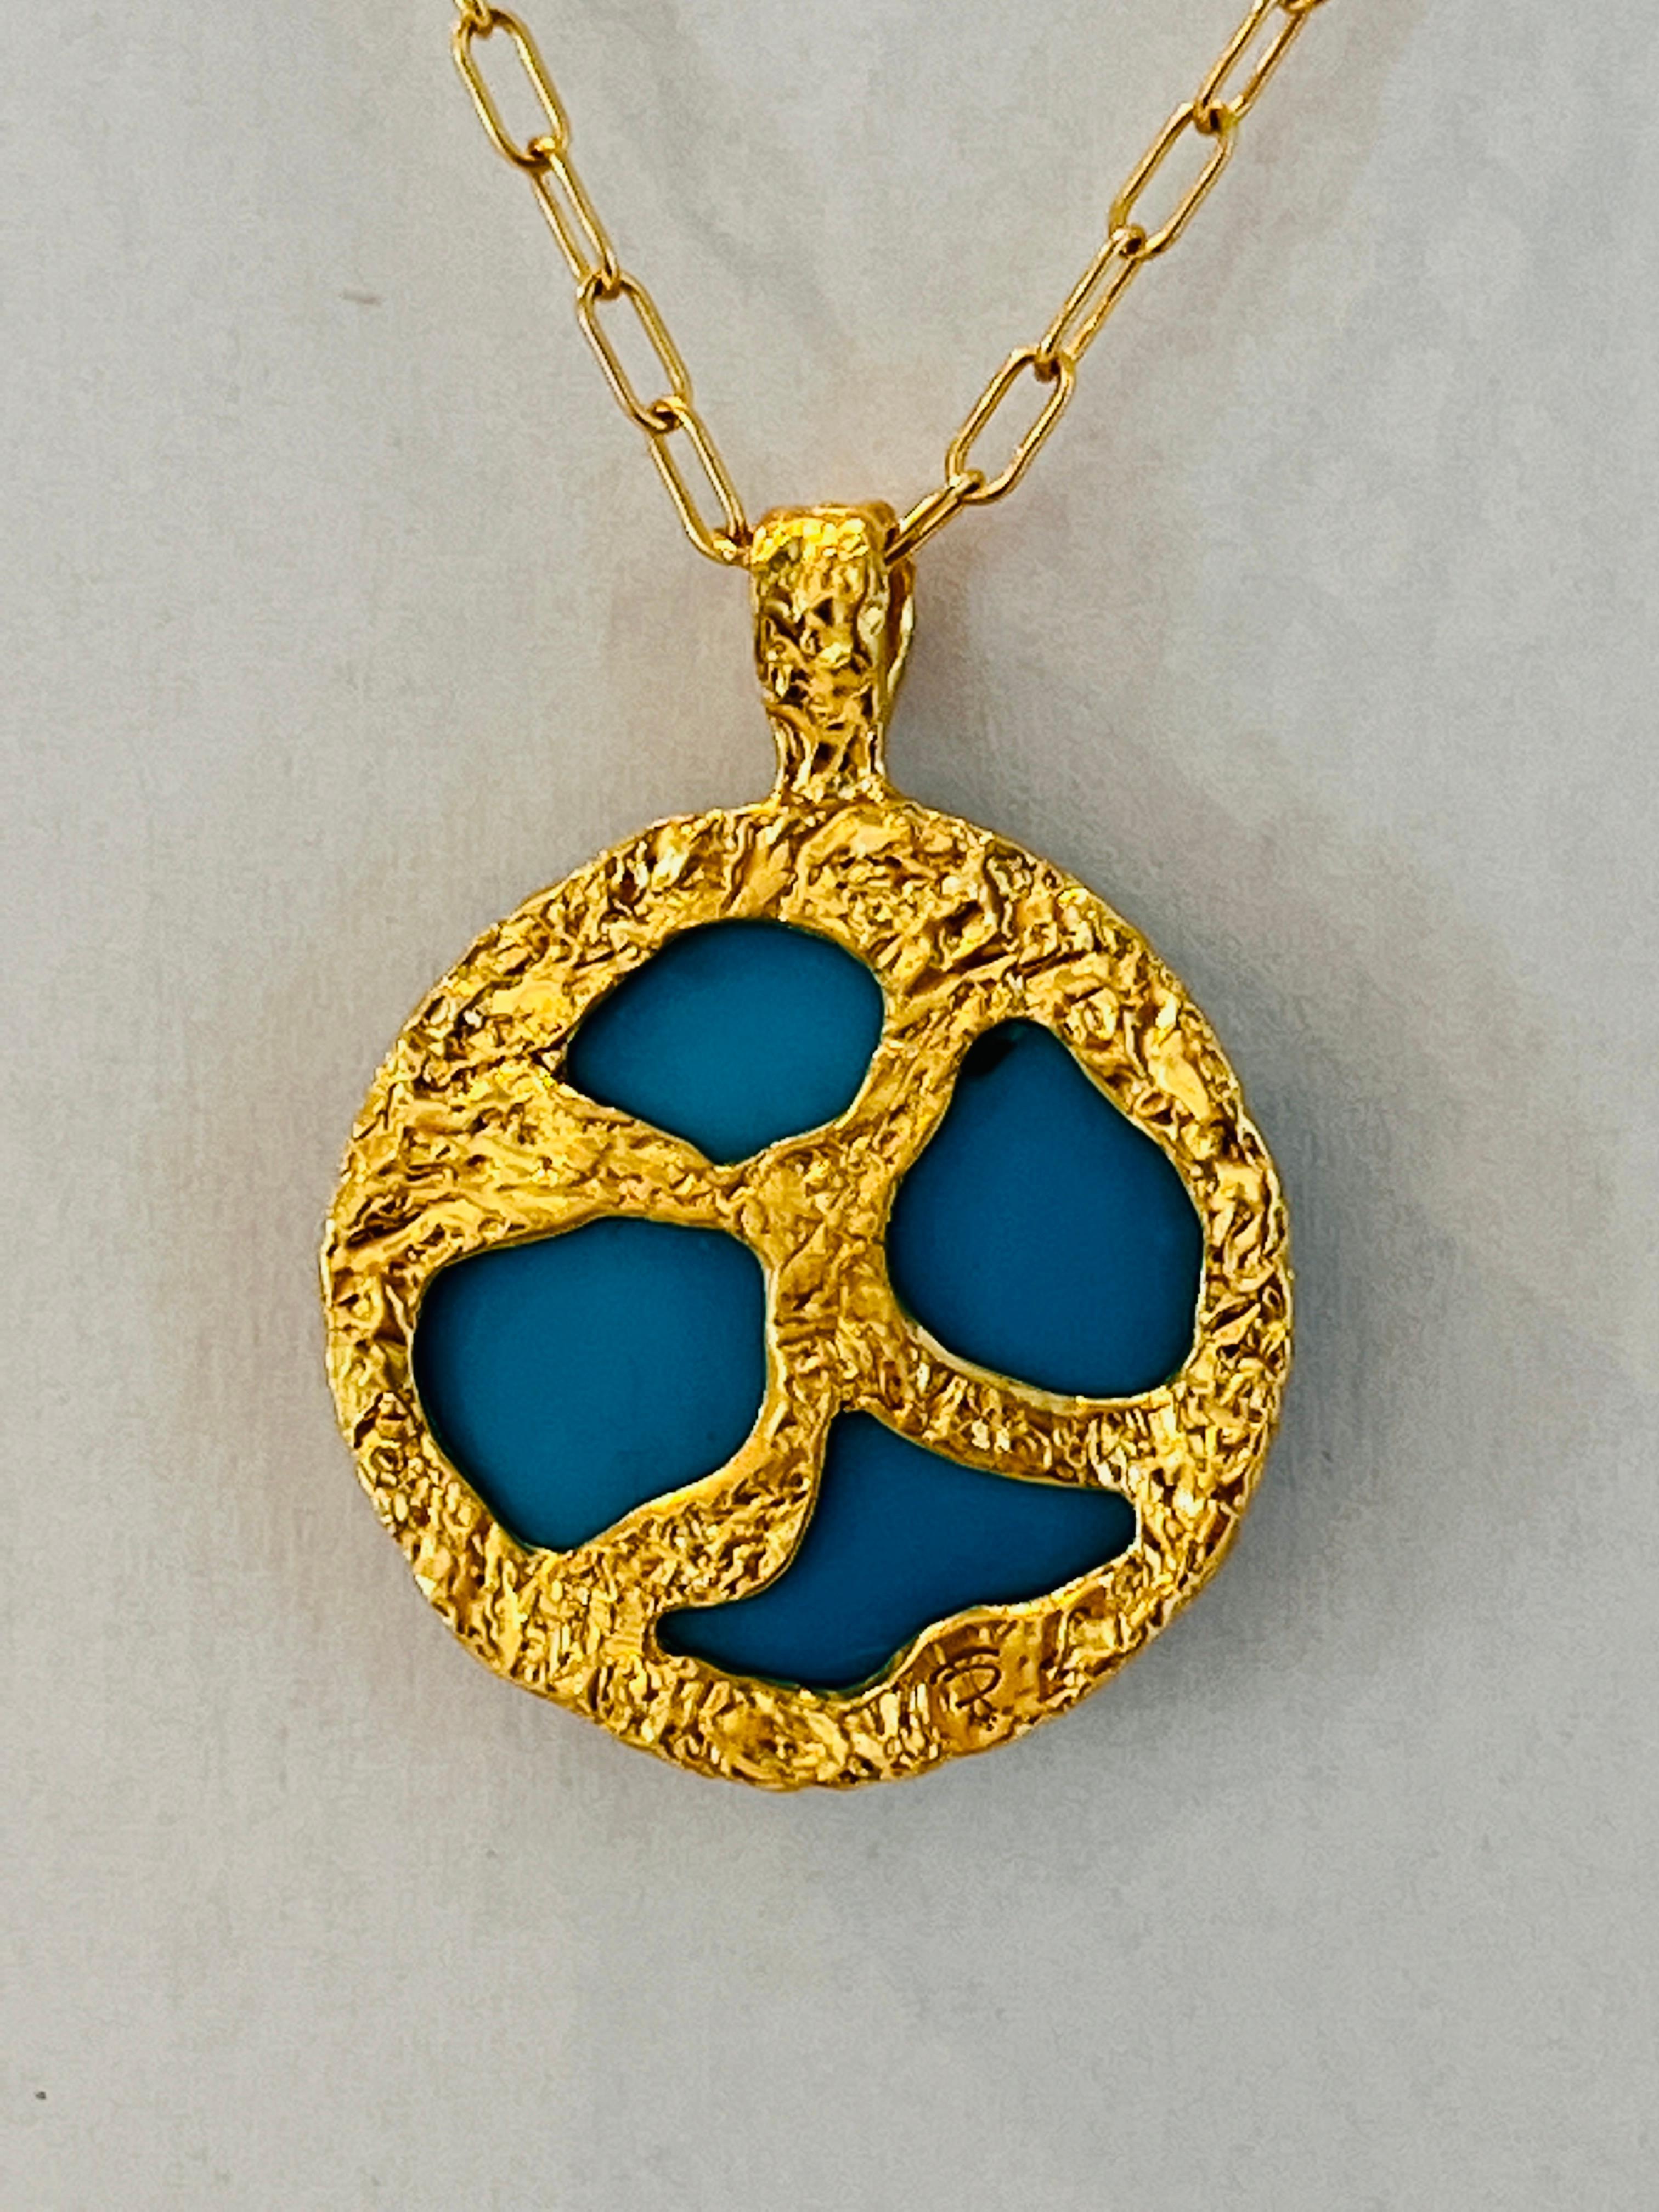 Turquoise Handmade Pendant in 22k Gold, by Tagili 3